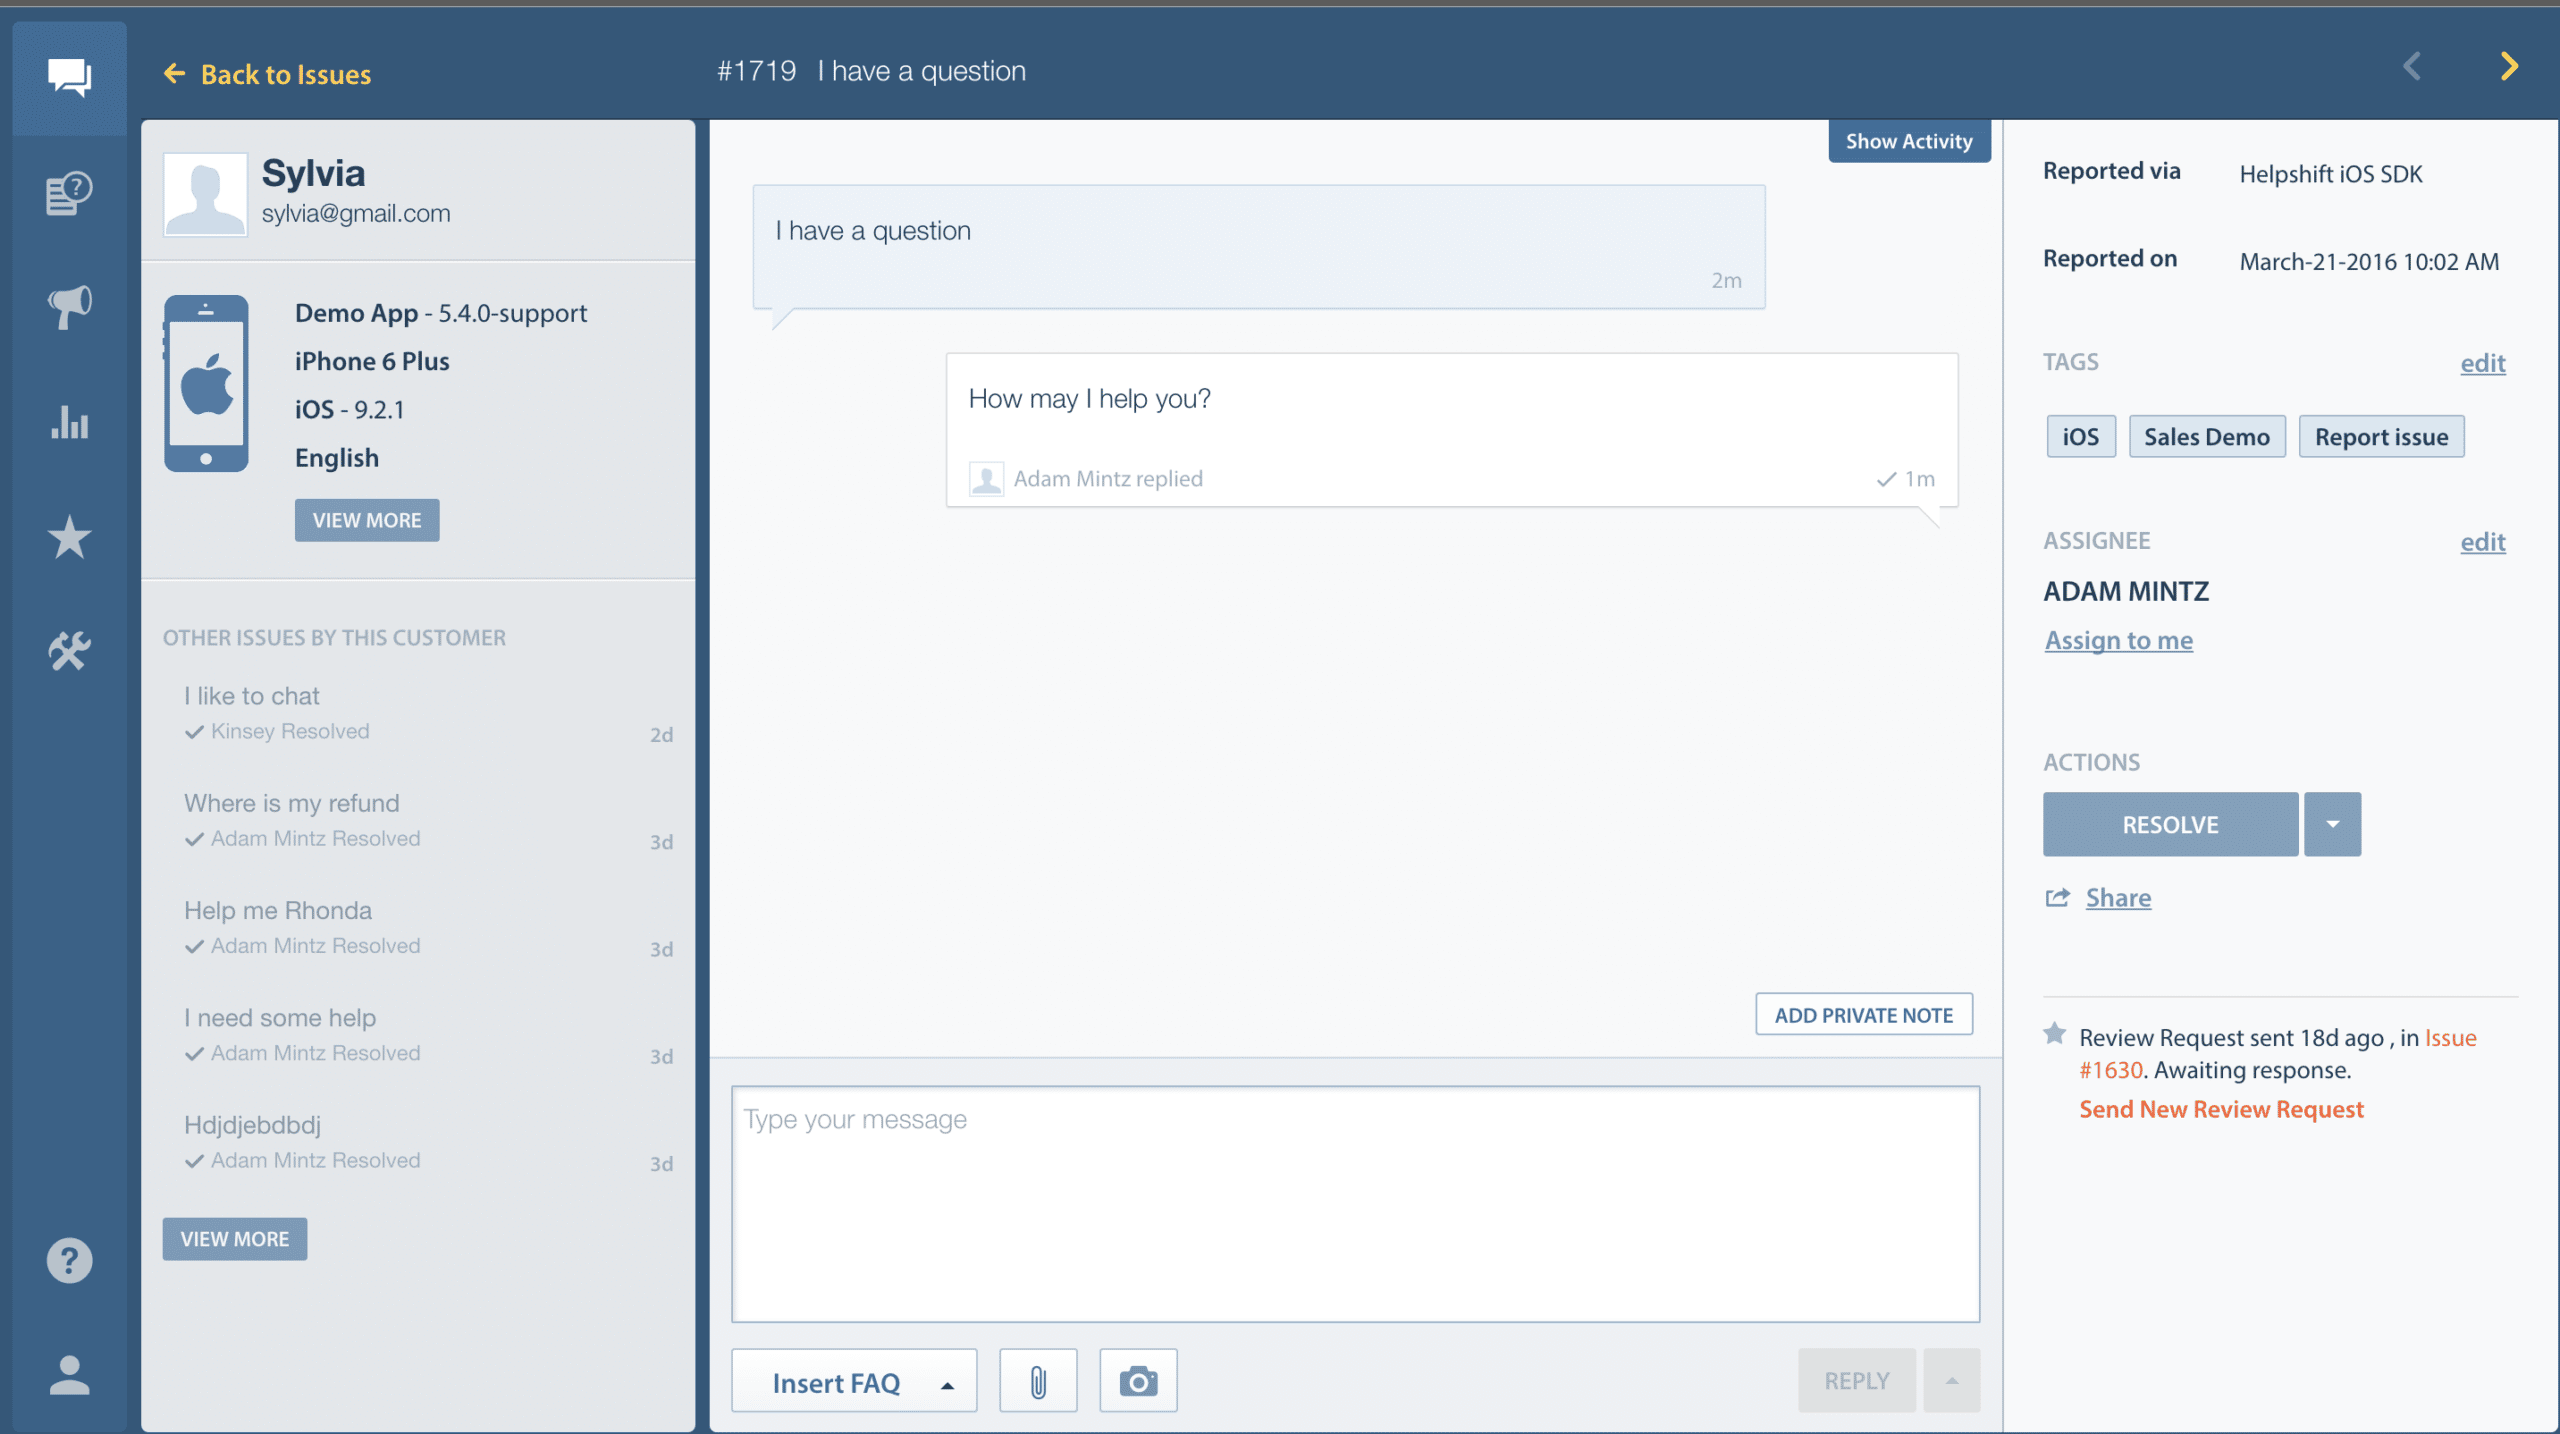 image of read receipts from Helpshift product blog post